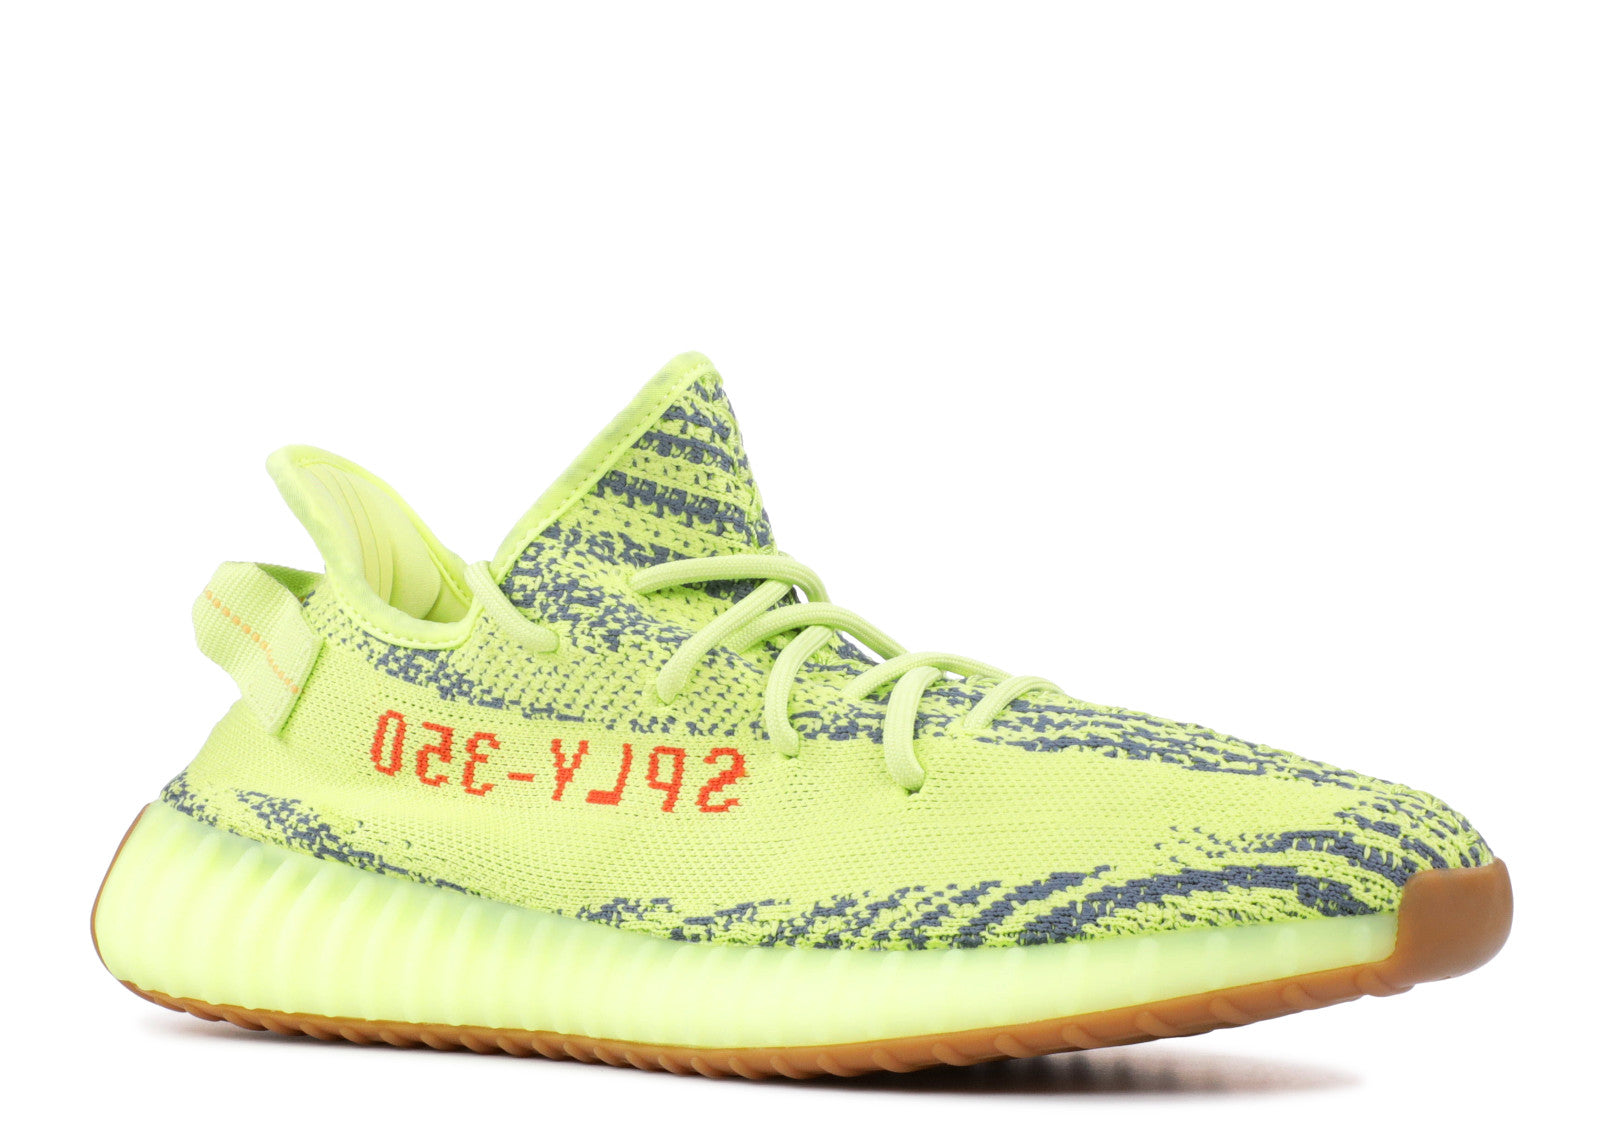 Adidas Yeezy Boost 350 V2 “Frozen Yellow” – Authentic Sole Boutique